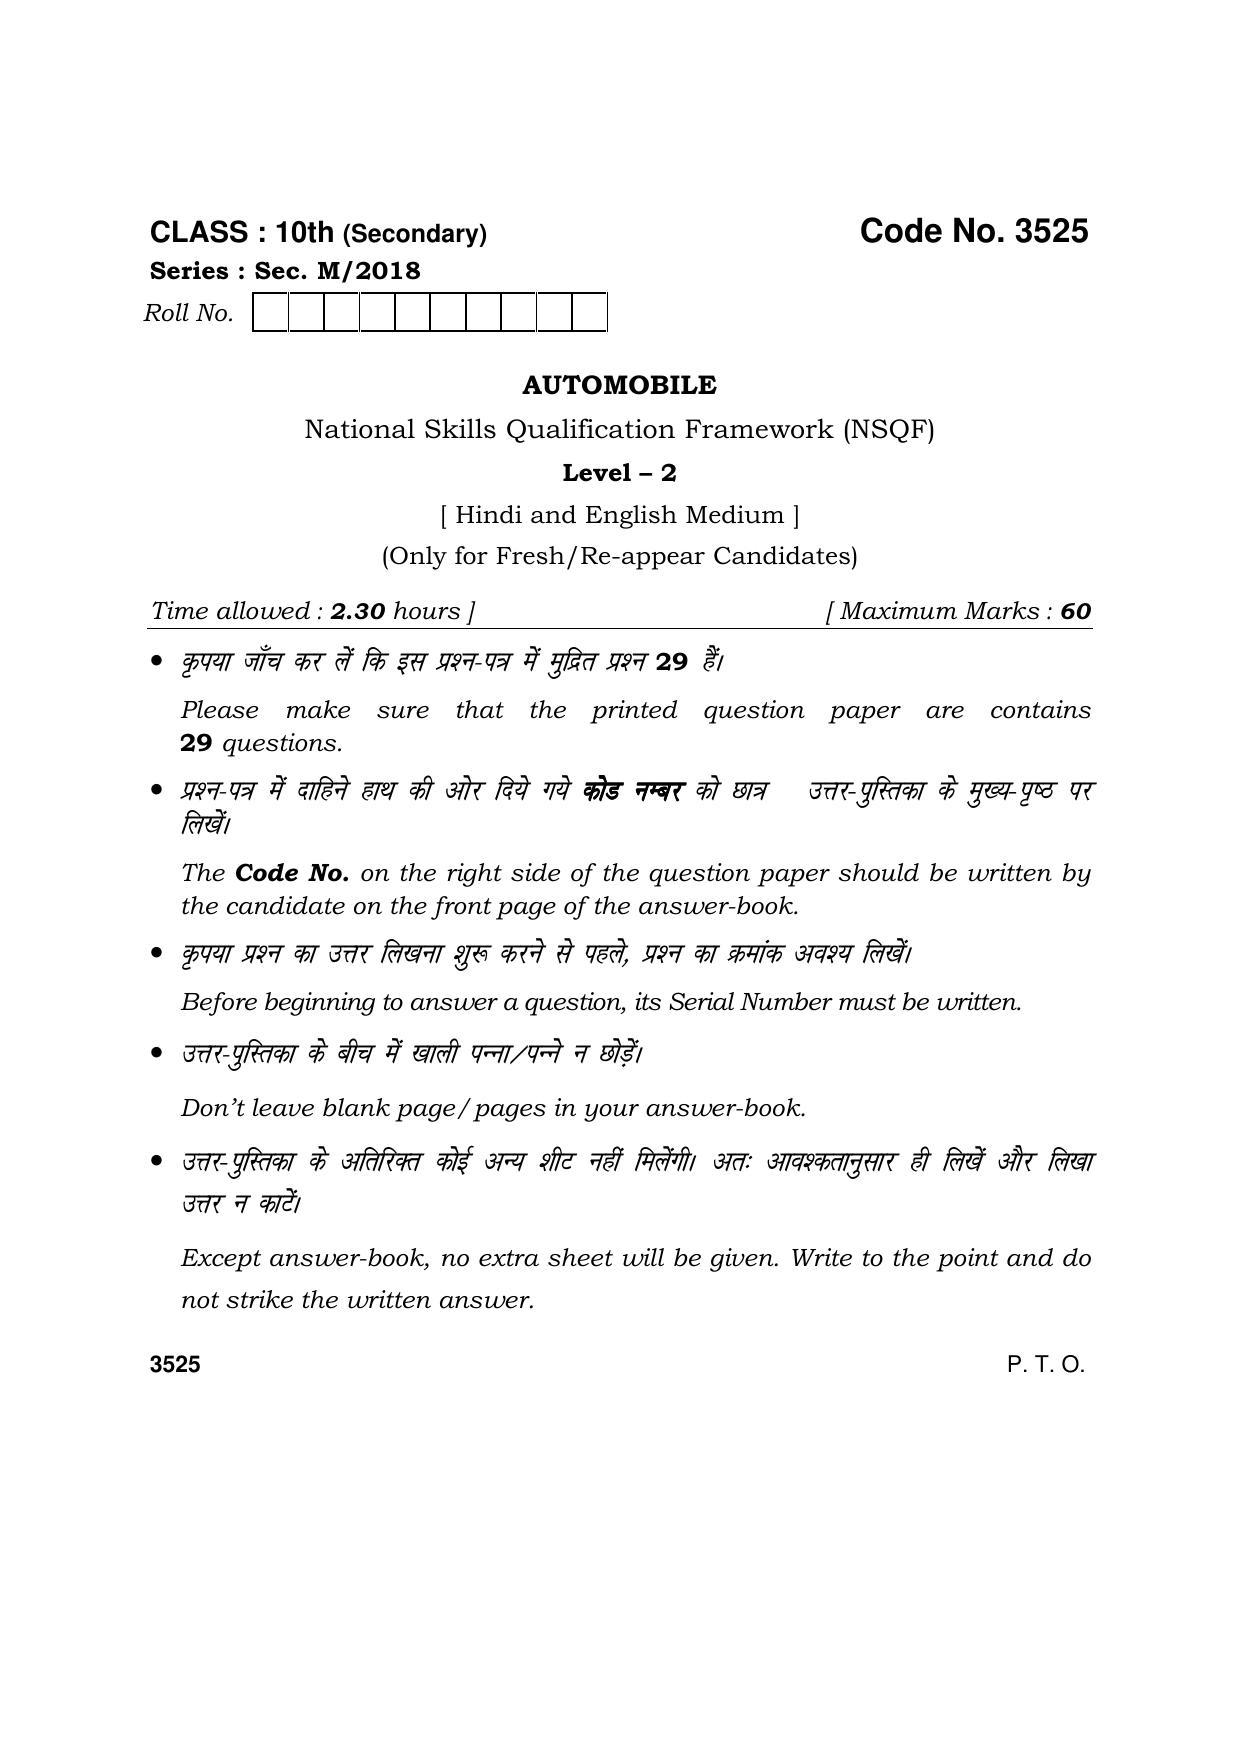 Haryana Board HBSE Class 10 Automobile 2018 Question Paper - Page 1